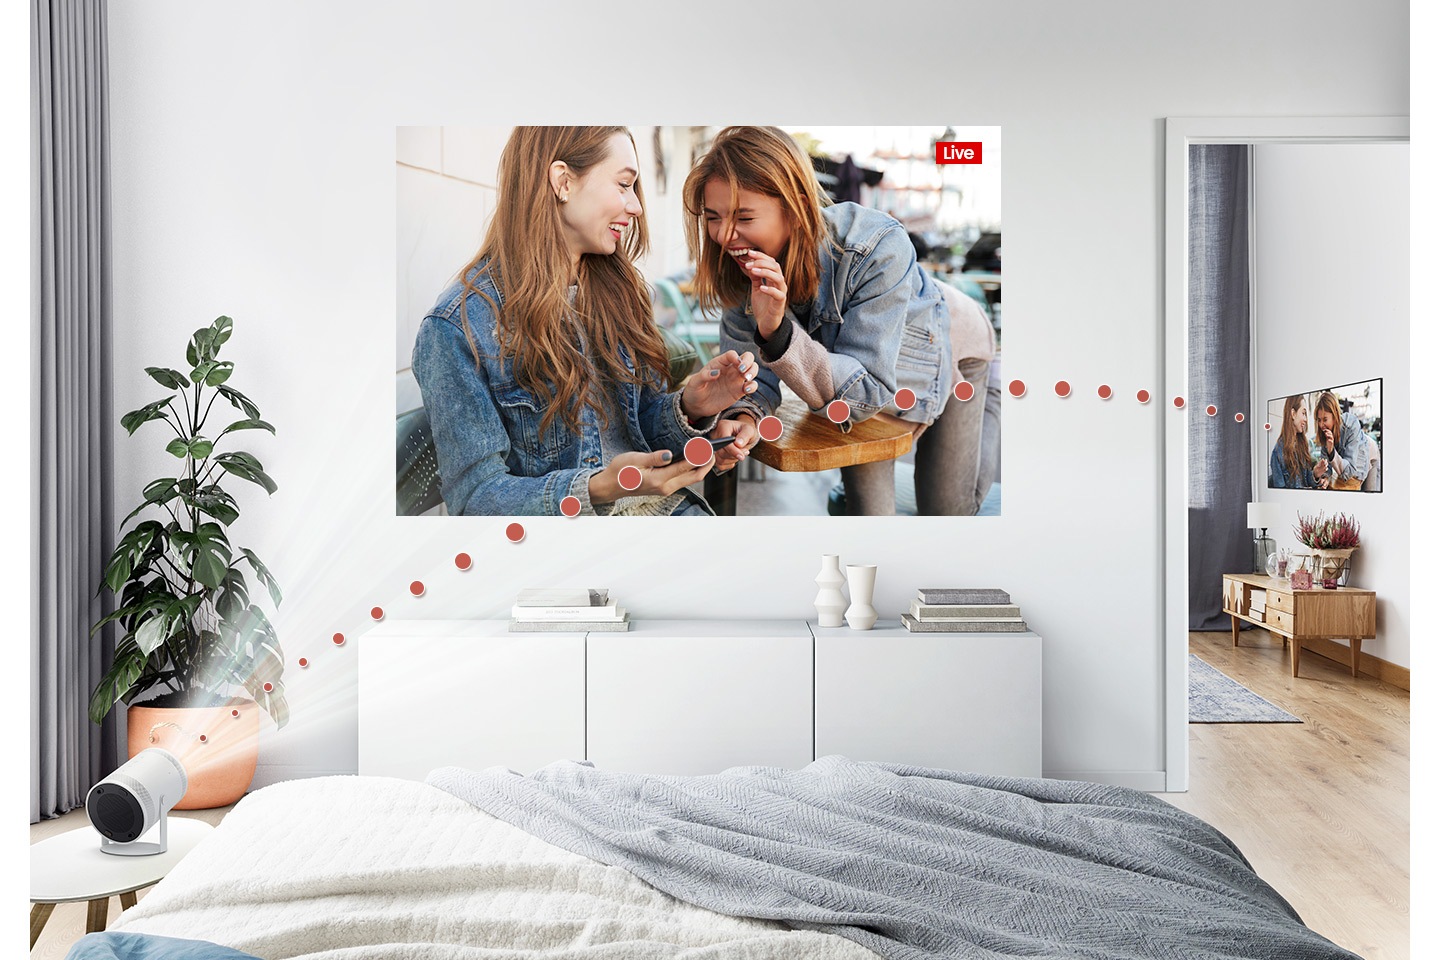 Connect and watch your TV from any room